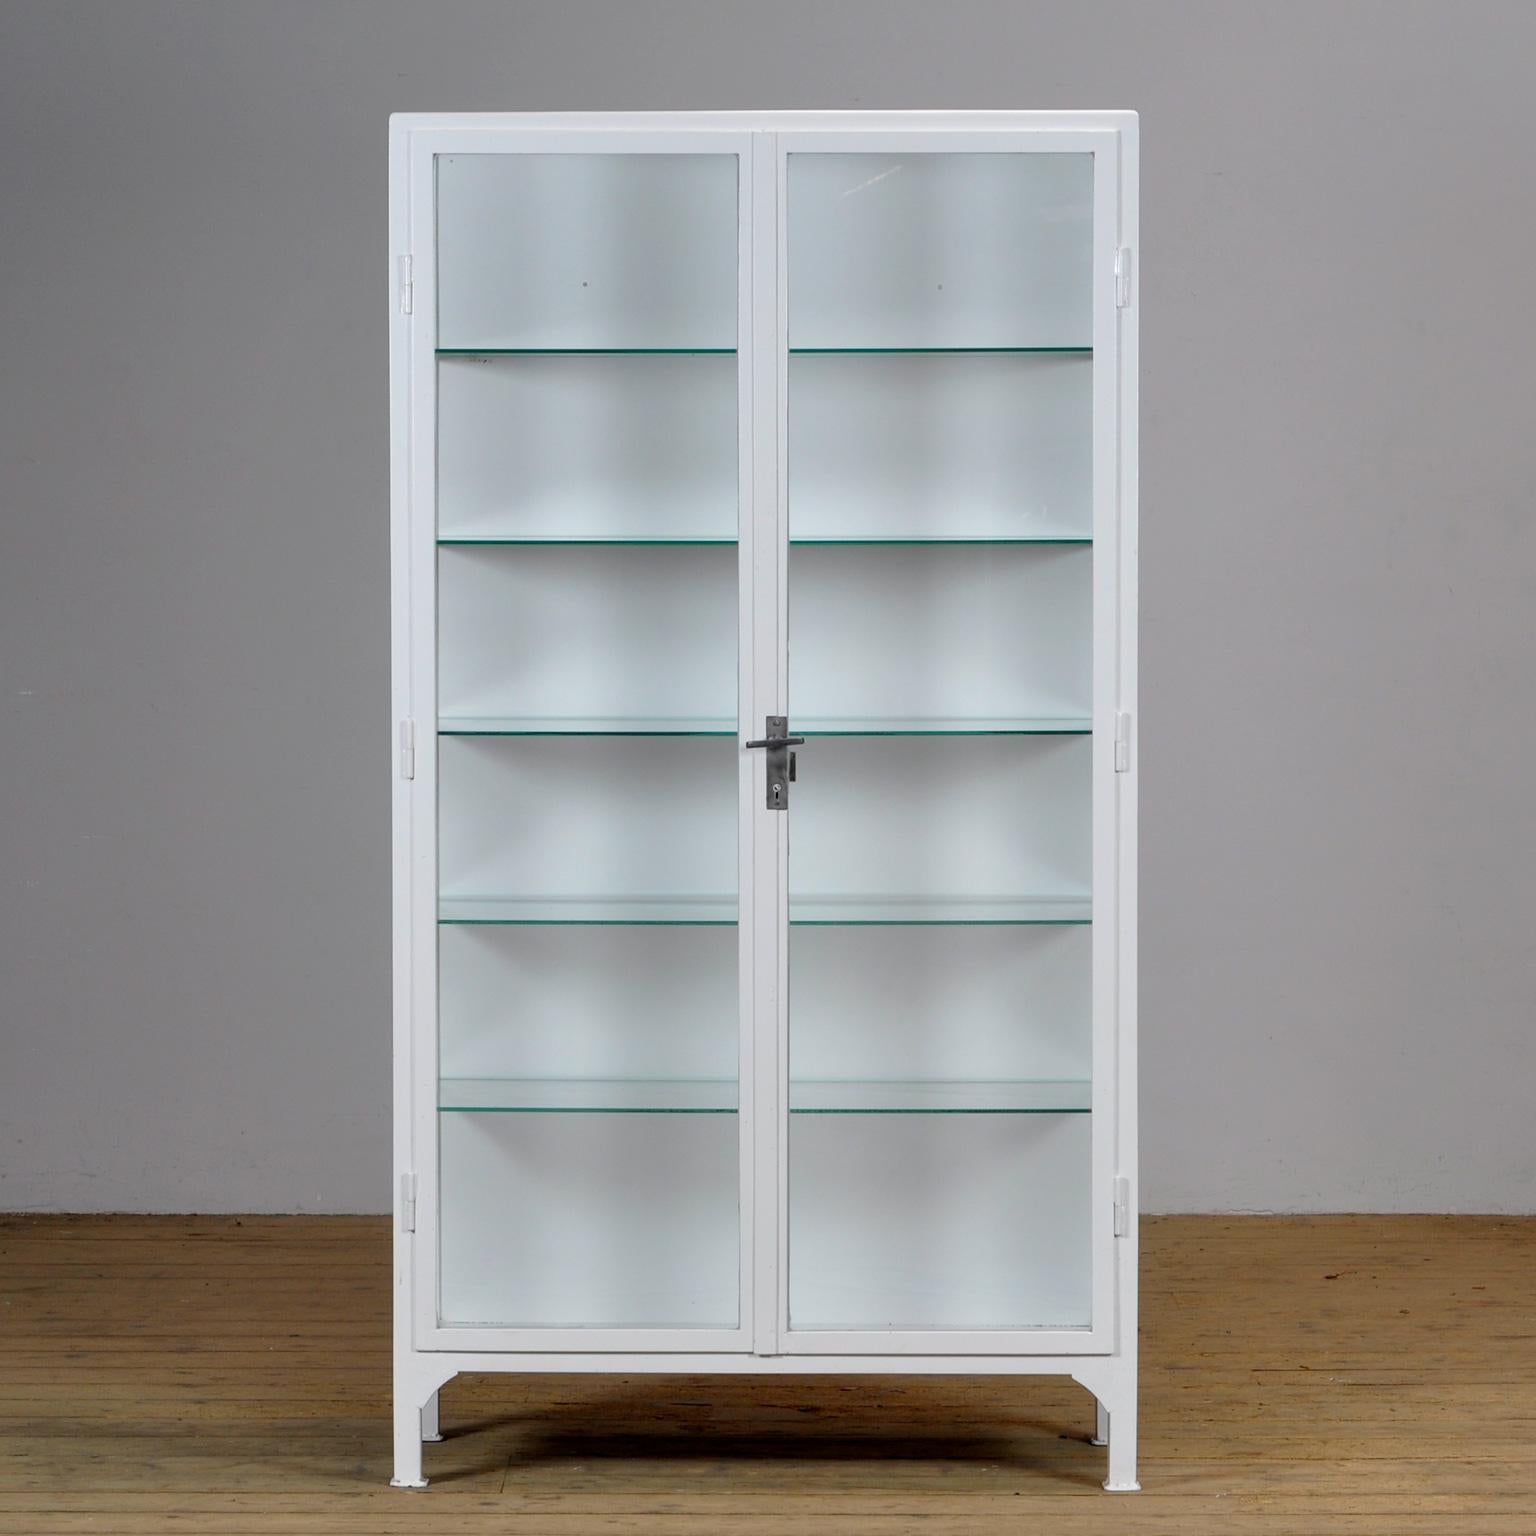 Polish medicine cabinet, produced in the 1960s. Made of iron and glass. The cabinet has recently been repainted and all the glass has been replaced. 5 new adjustable glass shelves on the inside. Heavy quality, the cabinet weighs approximately 80kg.